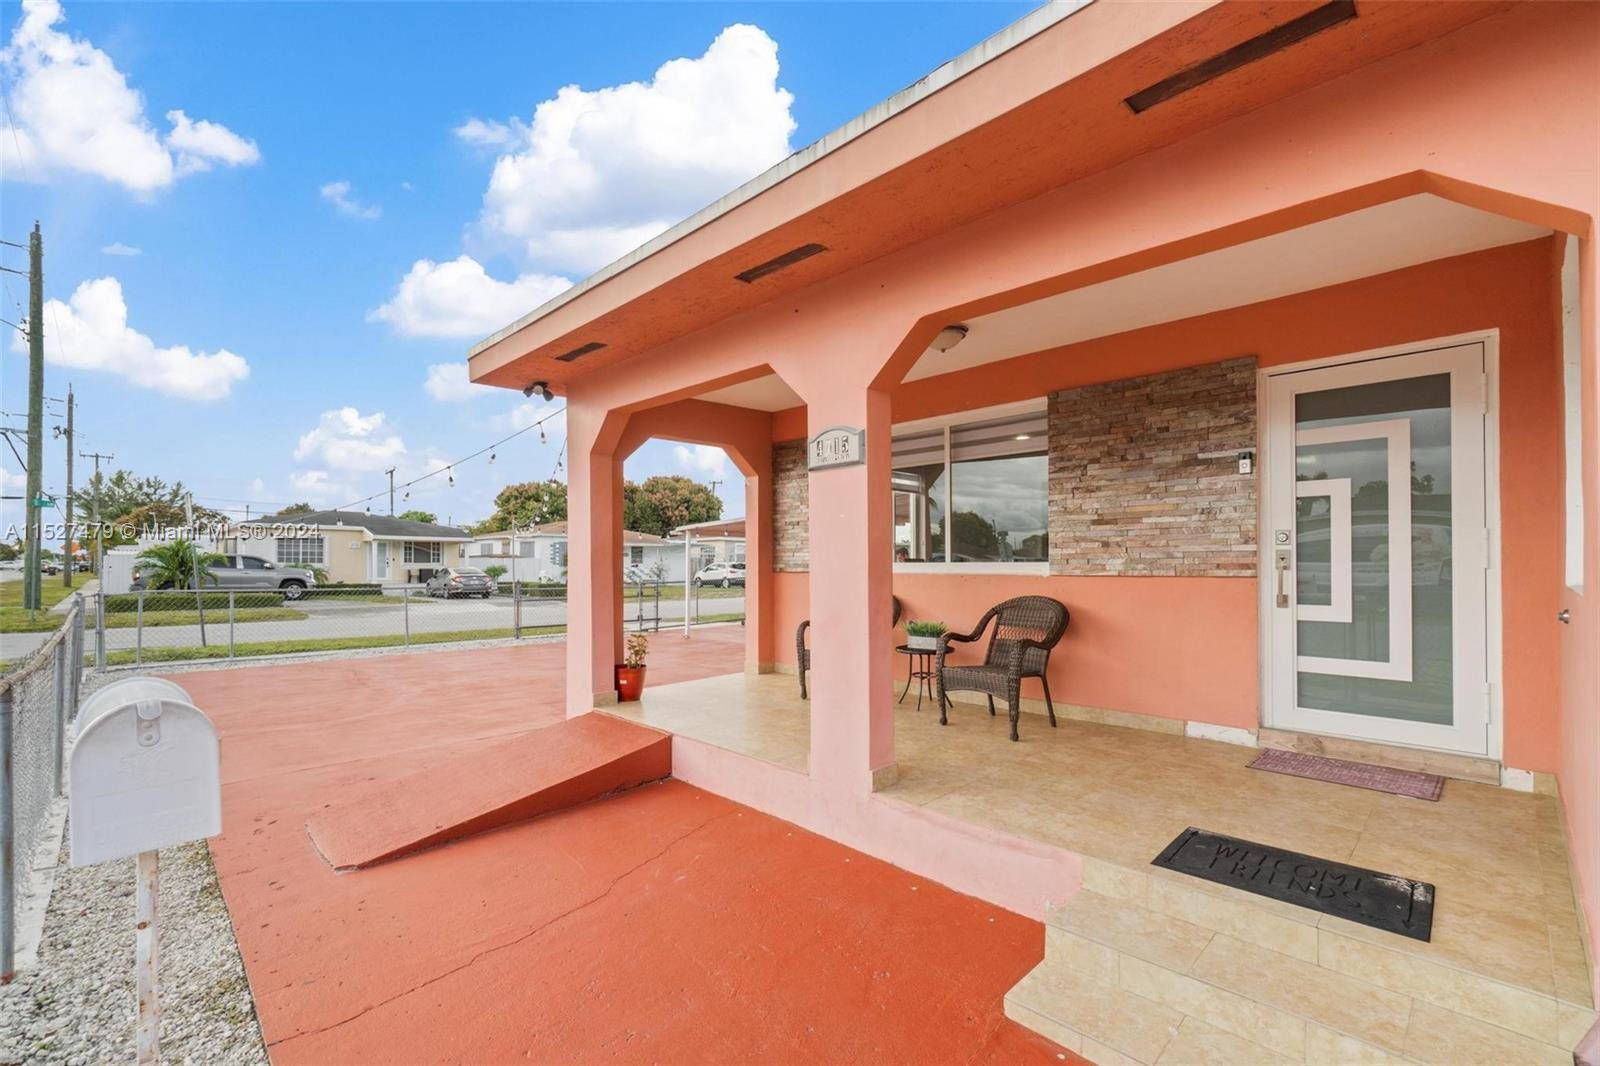 10 thousand dollars contribution for closing costs, Centrally located in East Hialeah this beautiful property has 3 bedrooms, 2 bathrooms in addition to a legal apartment that has 1 bedroom ...